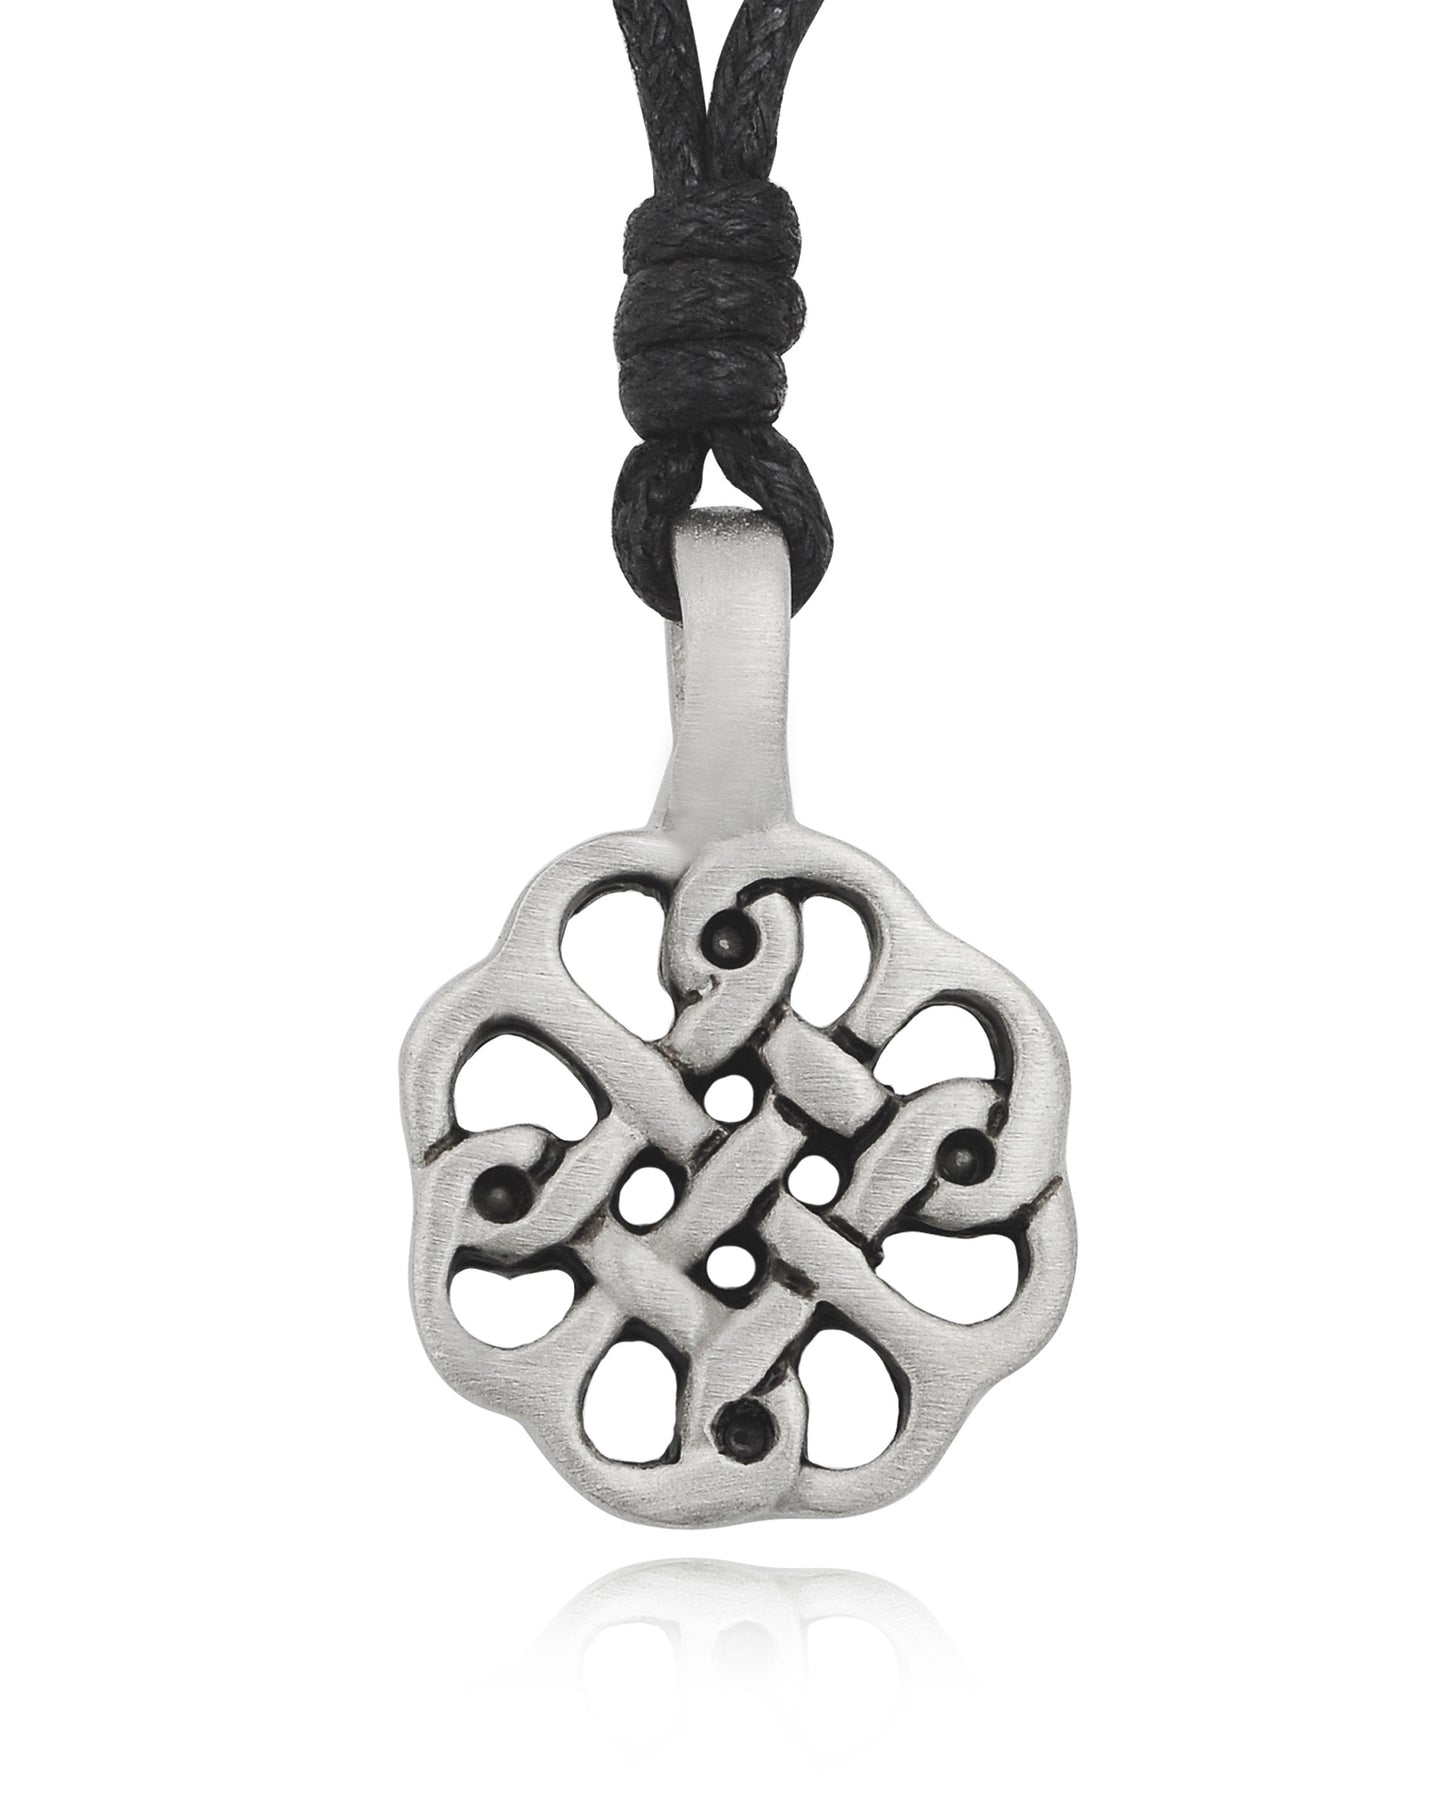 Celtic Flower Design Silver Pewter Charm Necklace Pendant Jewelry